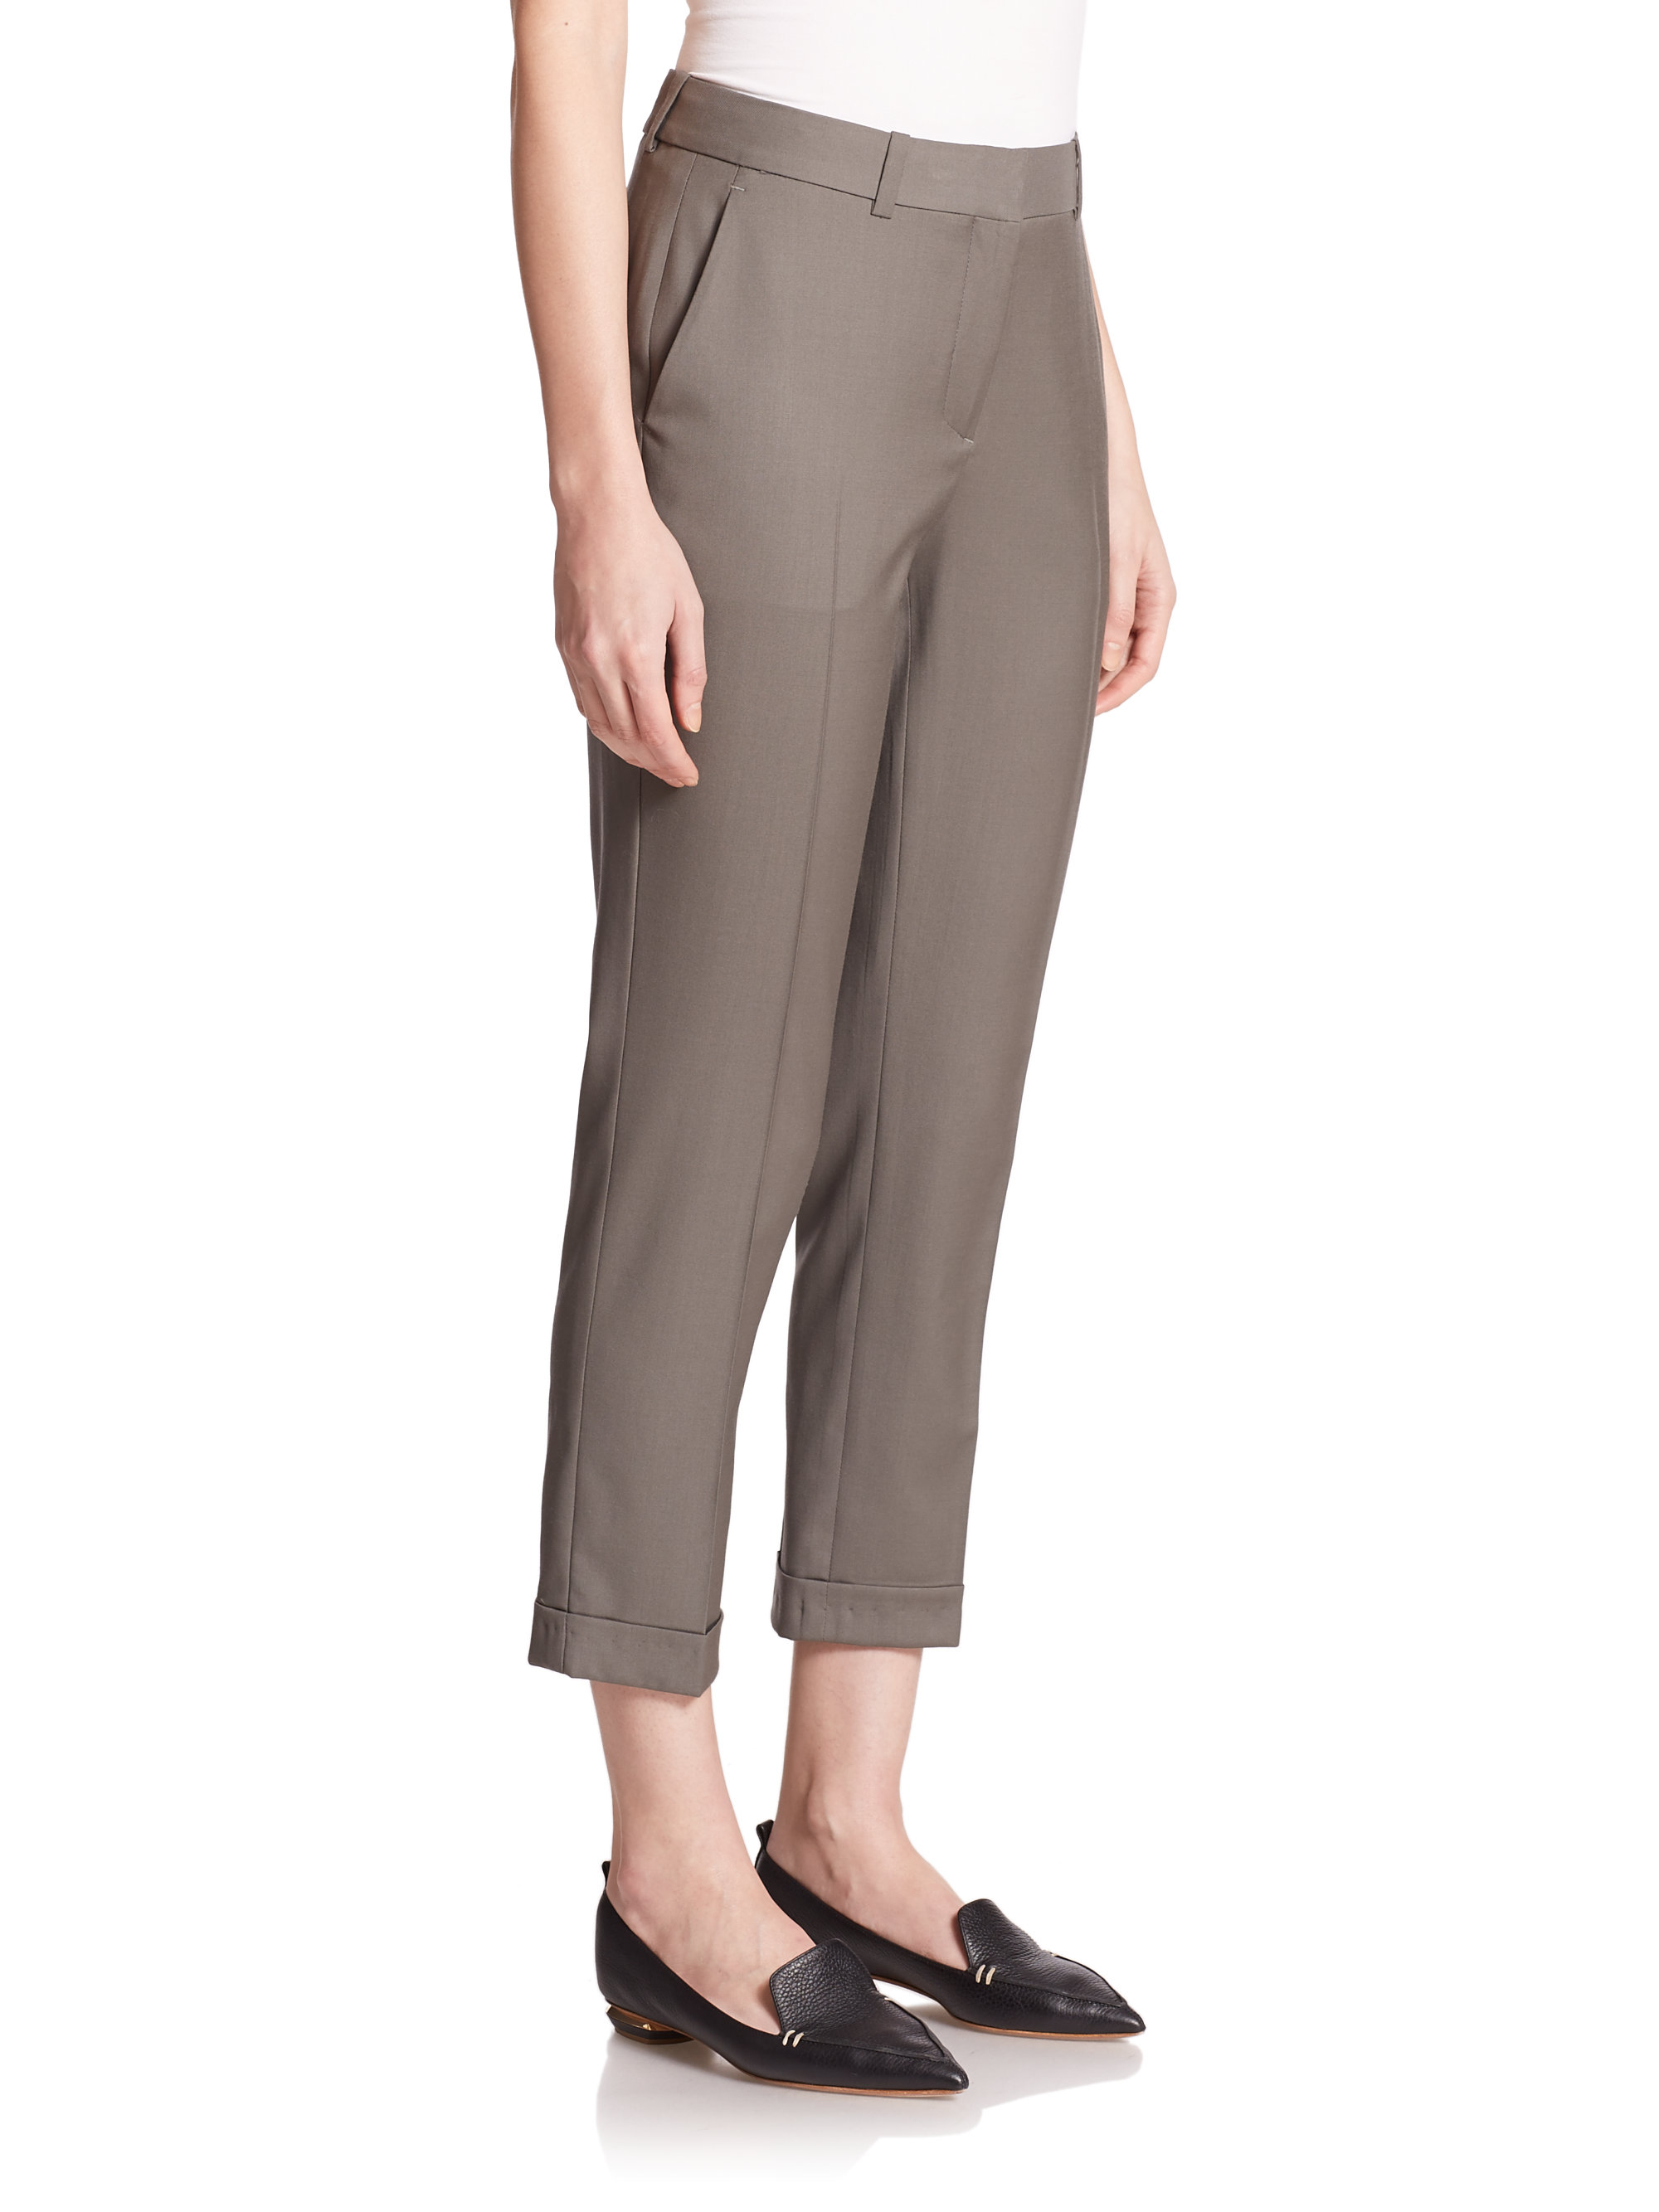 Lyst - Theory Mustadio Cropped Wool Pants in Gray